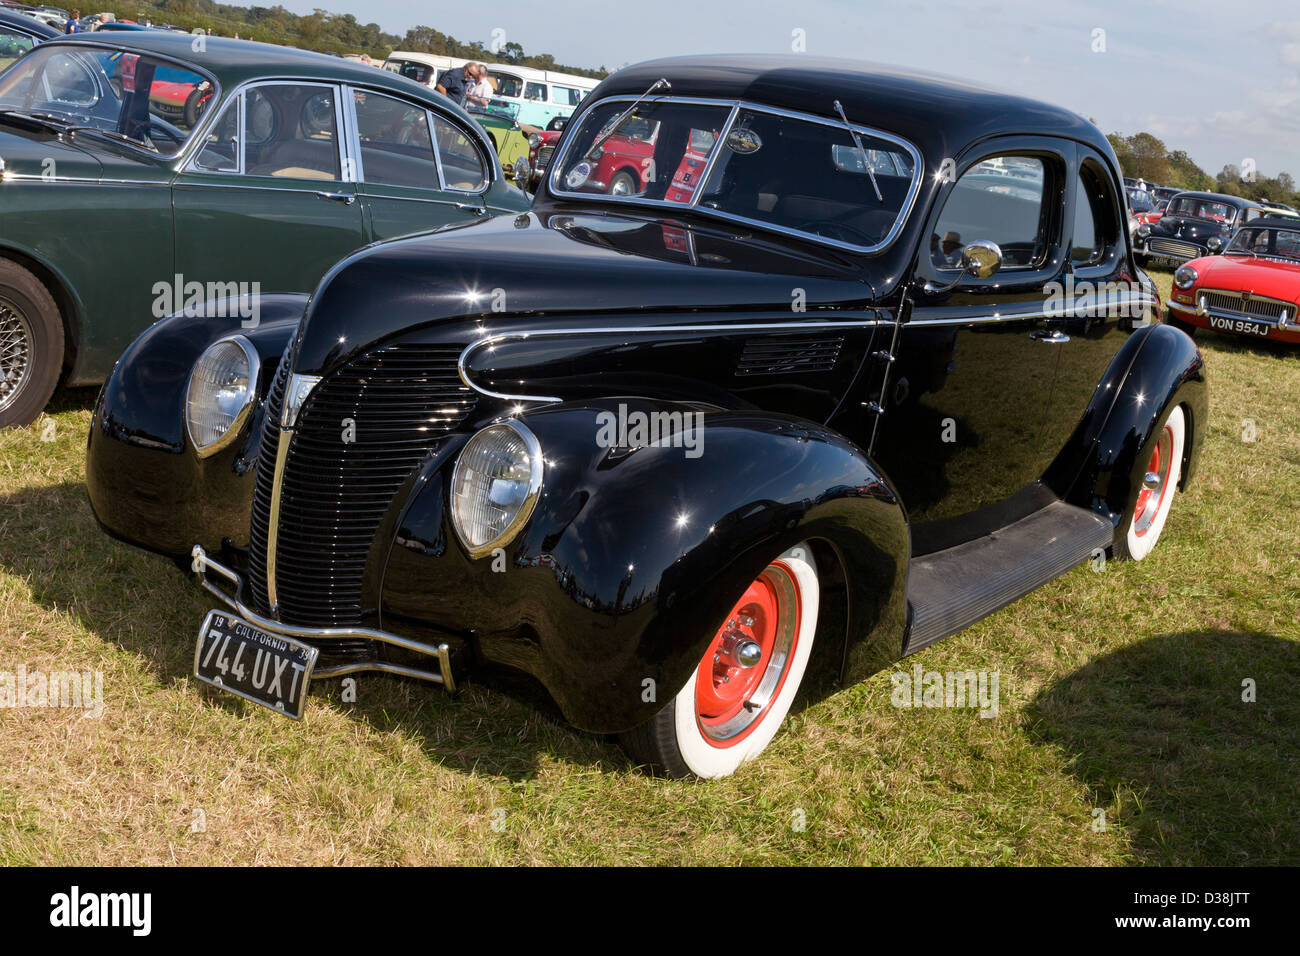 1939 Ford V8 Coupe, 744UXT,  at the 2012 Goodwood Revival, Sussex, UK. Stock Photo